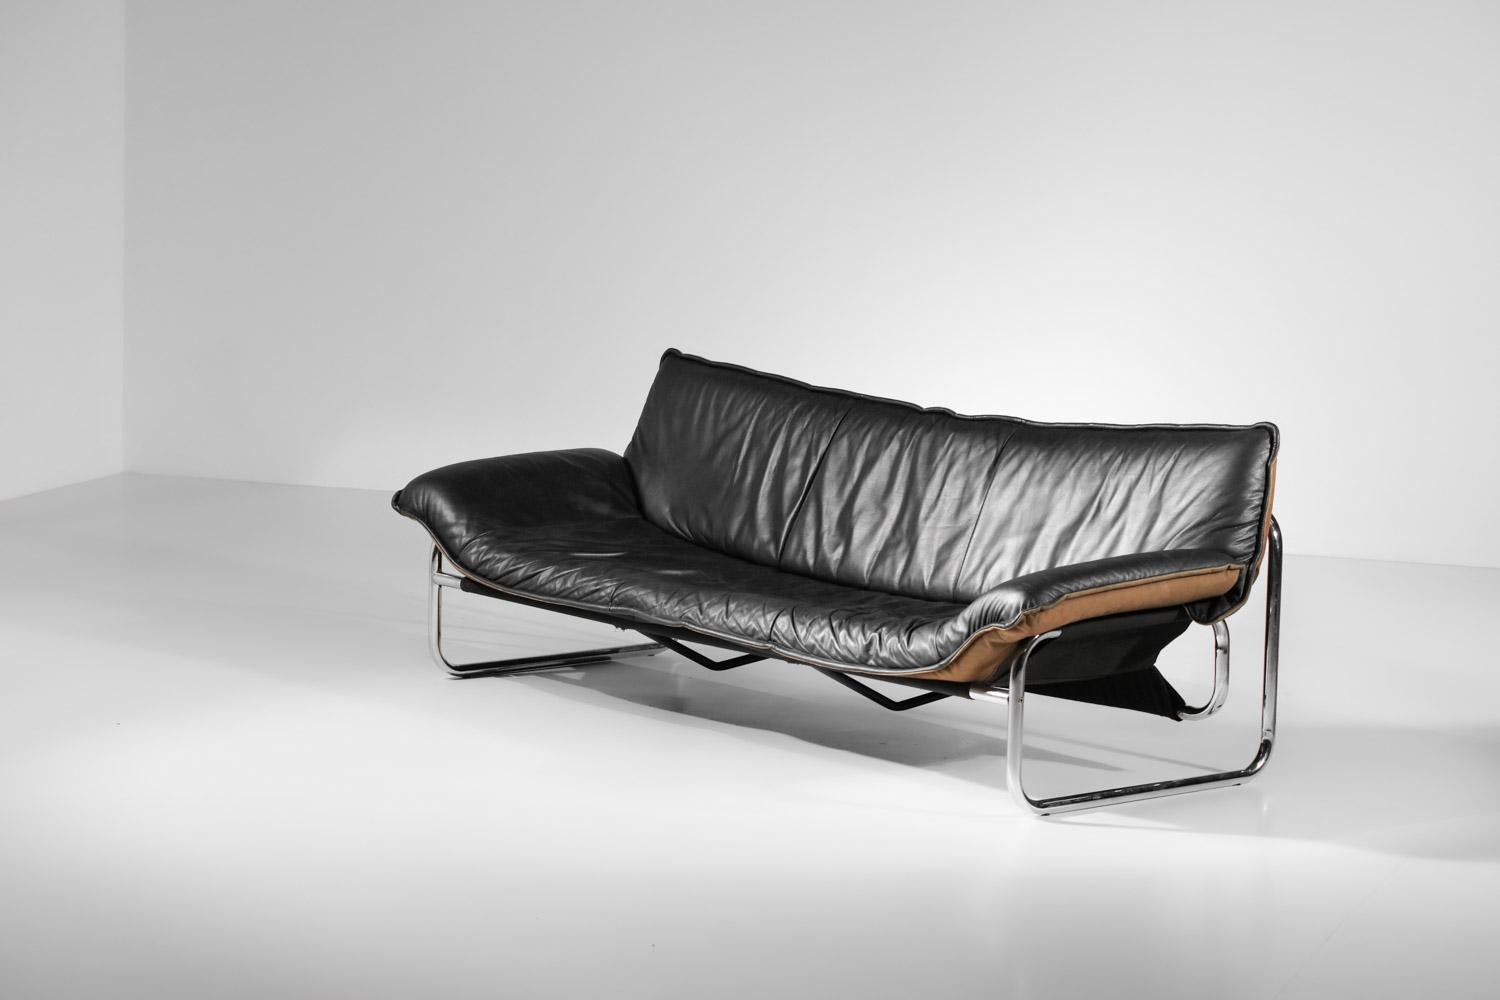 Steel Sofa  by Johan Bertil Haggstrom for ikea 70's in leather and chromed steel